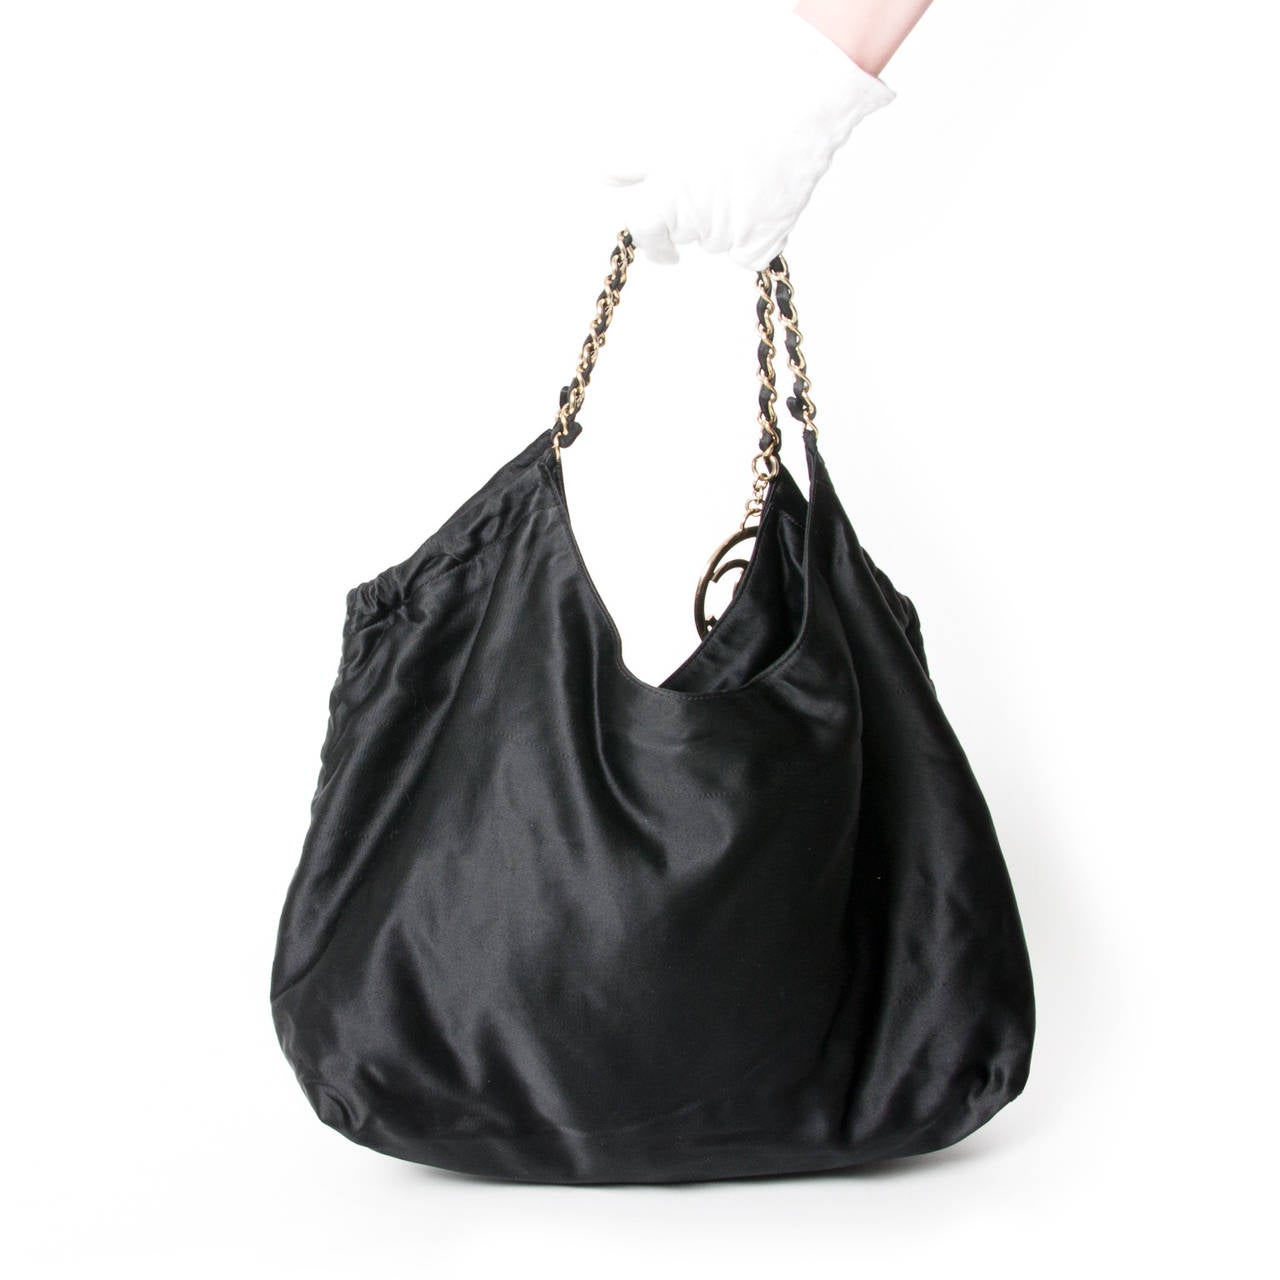 Black satin Chanel Coco Cabas

This tote with gold-tone hardware has a medallion with the Chanel logo.

The bag has a satin lining, interior pockets, detachable make-up bag, chain shoulder straps and magnetic closure.

On the frontside is the